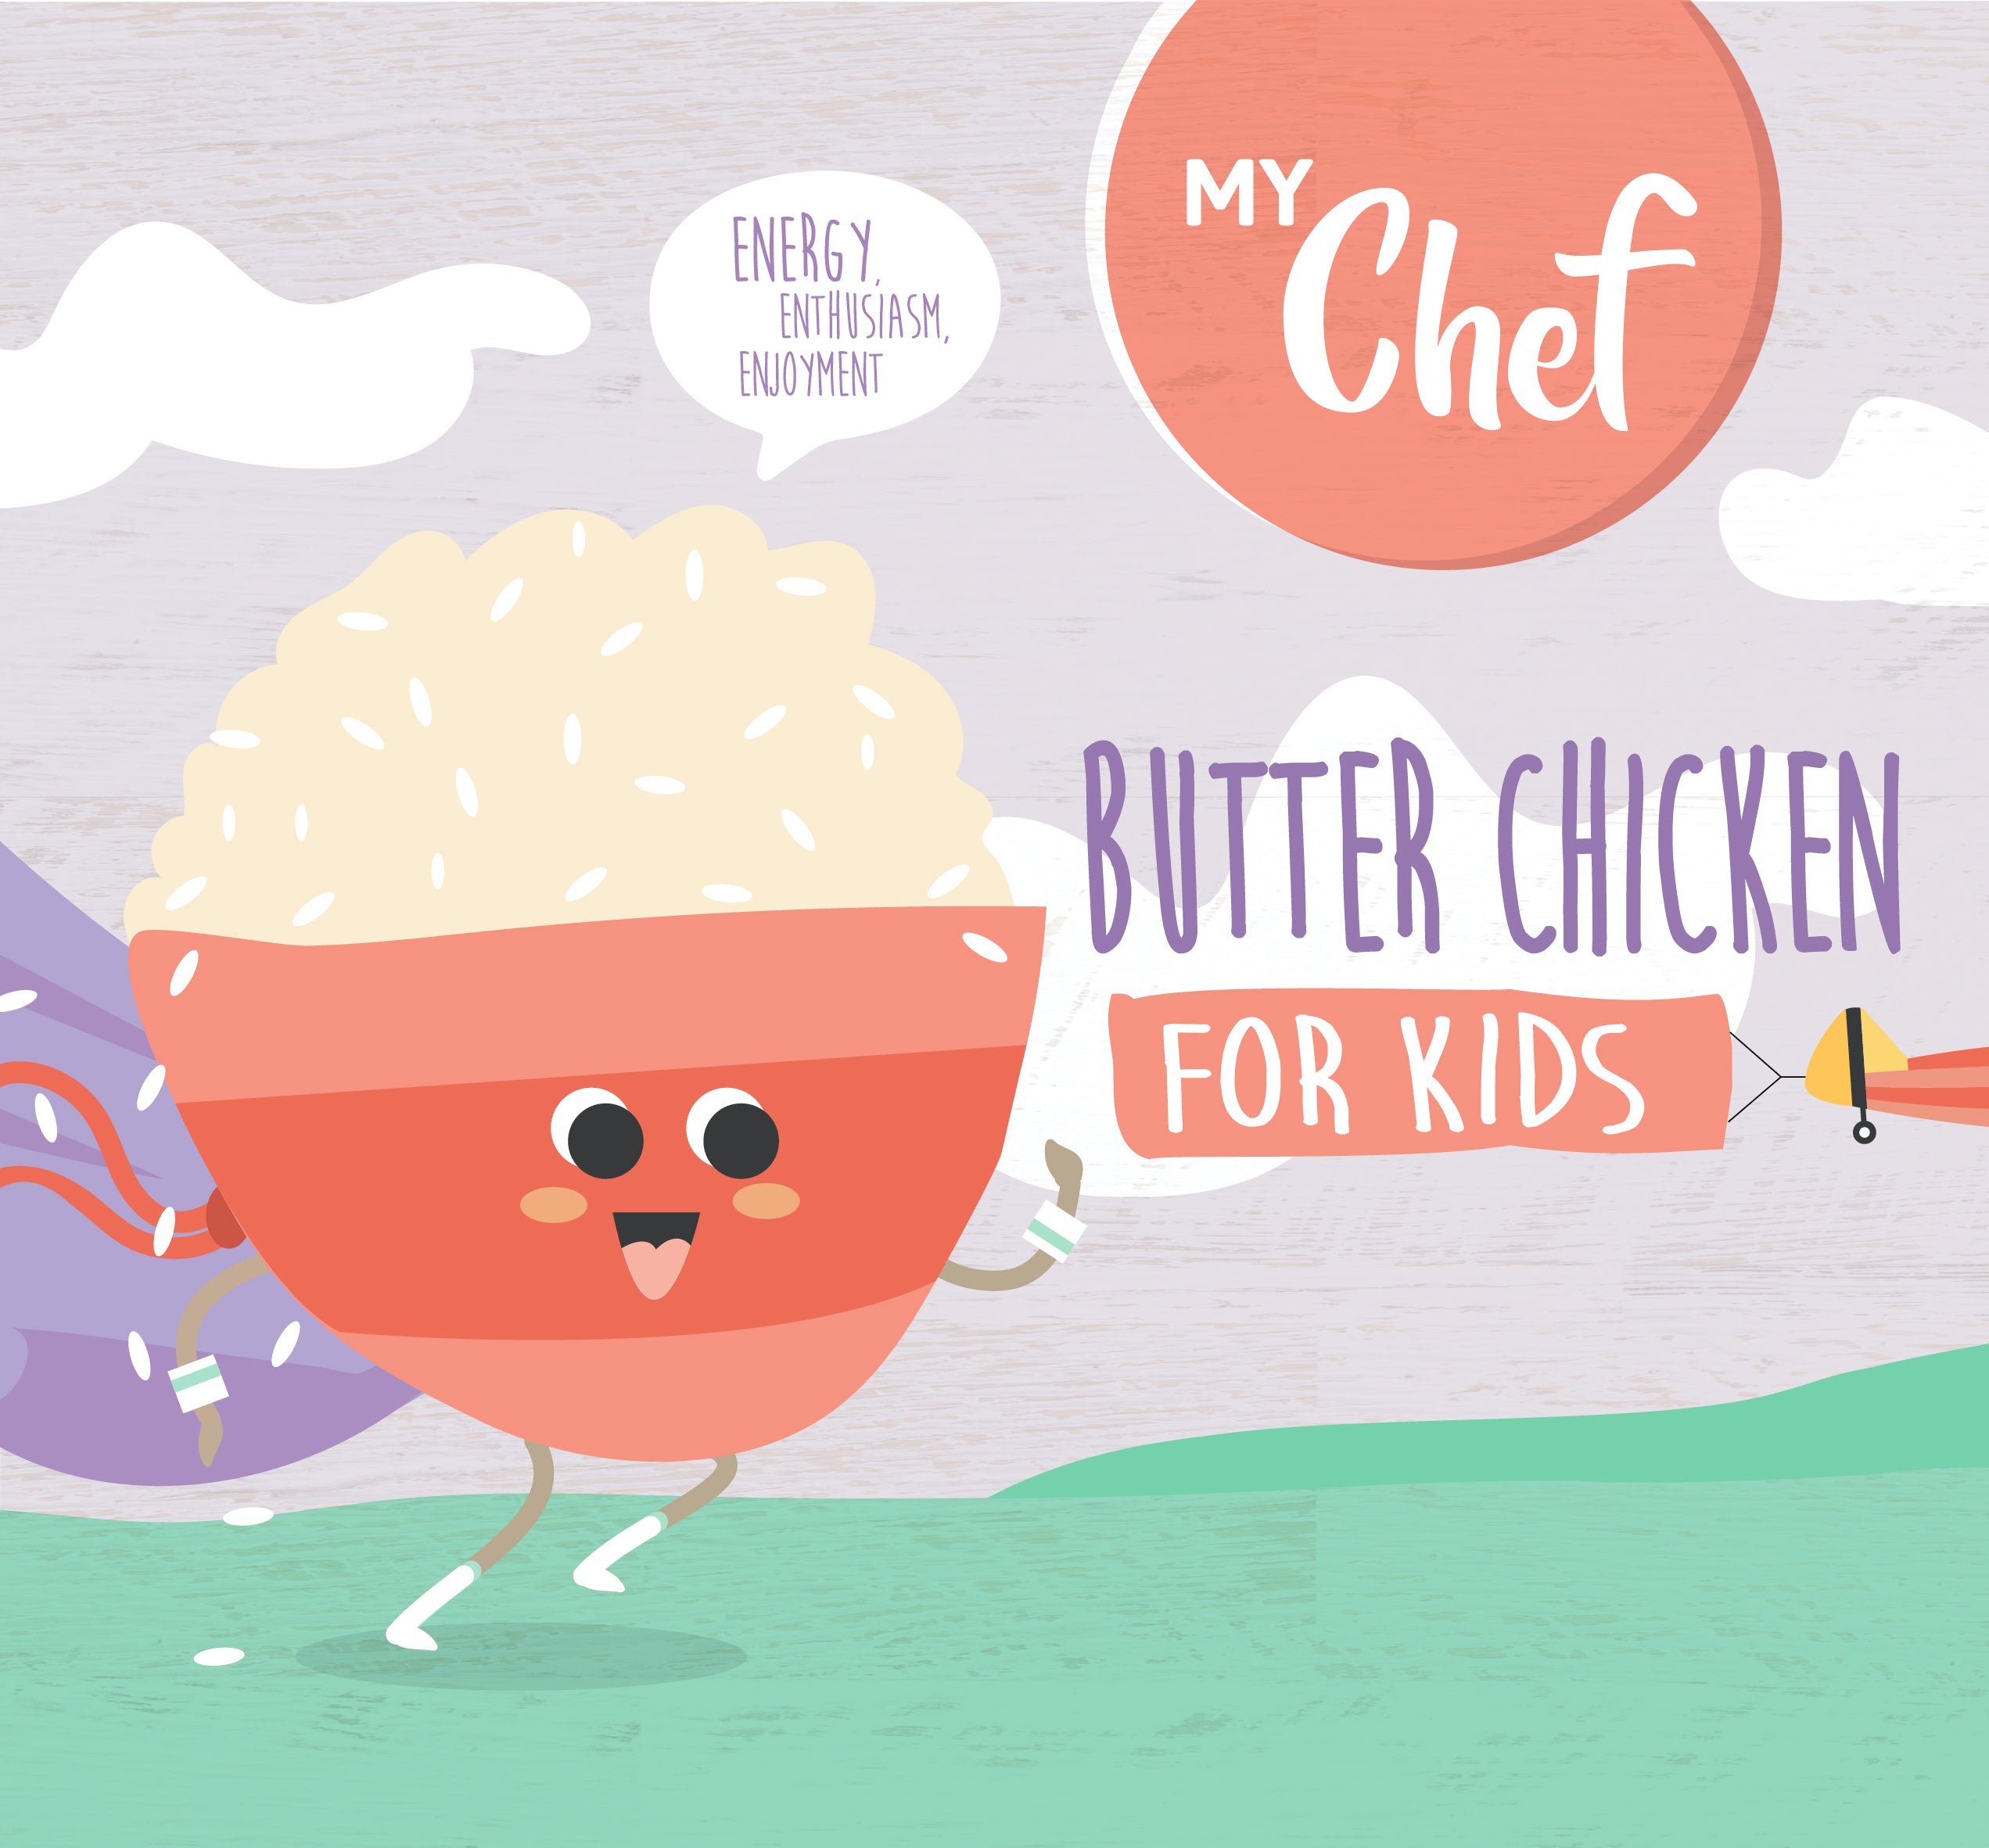 Introduce your little ones to the flavors of our Kids Butter Chicken, gluten-free and made with care in our family kitchen